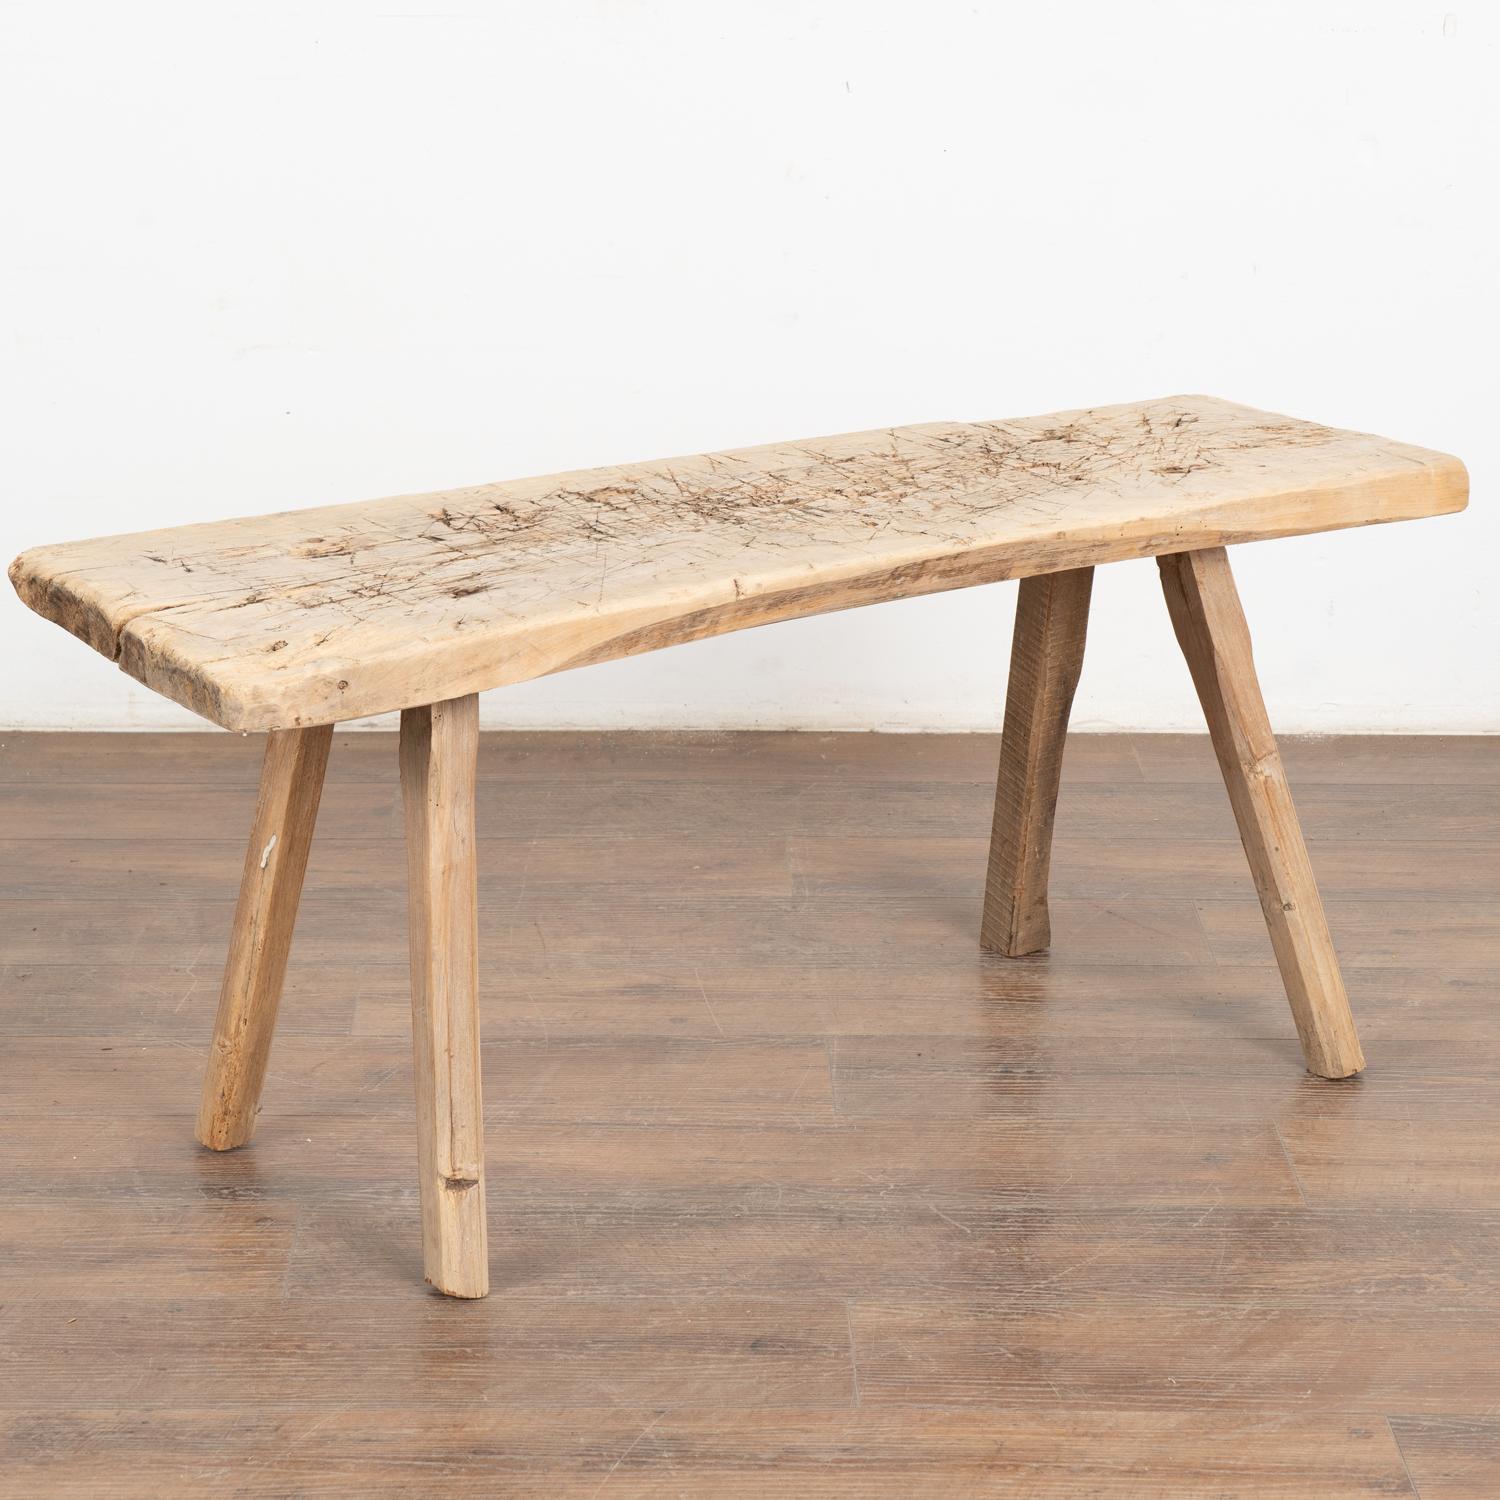 The appeal of this rustic bench at just under 4' long comes from the thick hard wood top that originally served as a work table, resting on strong squared peg legs. 
Note the heavy gouges, nicks, old cracks, dried worm holes and stains that all